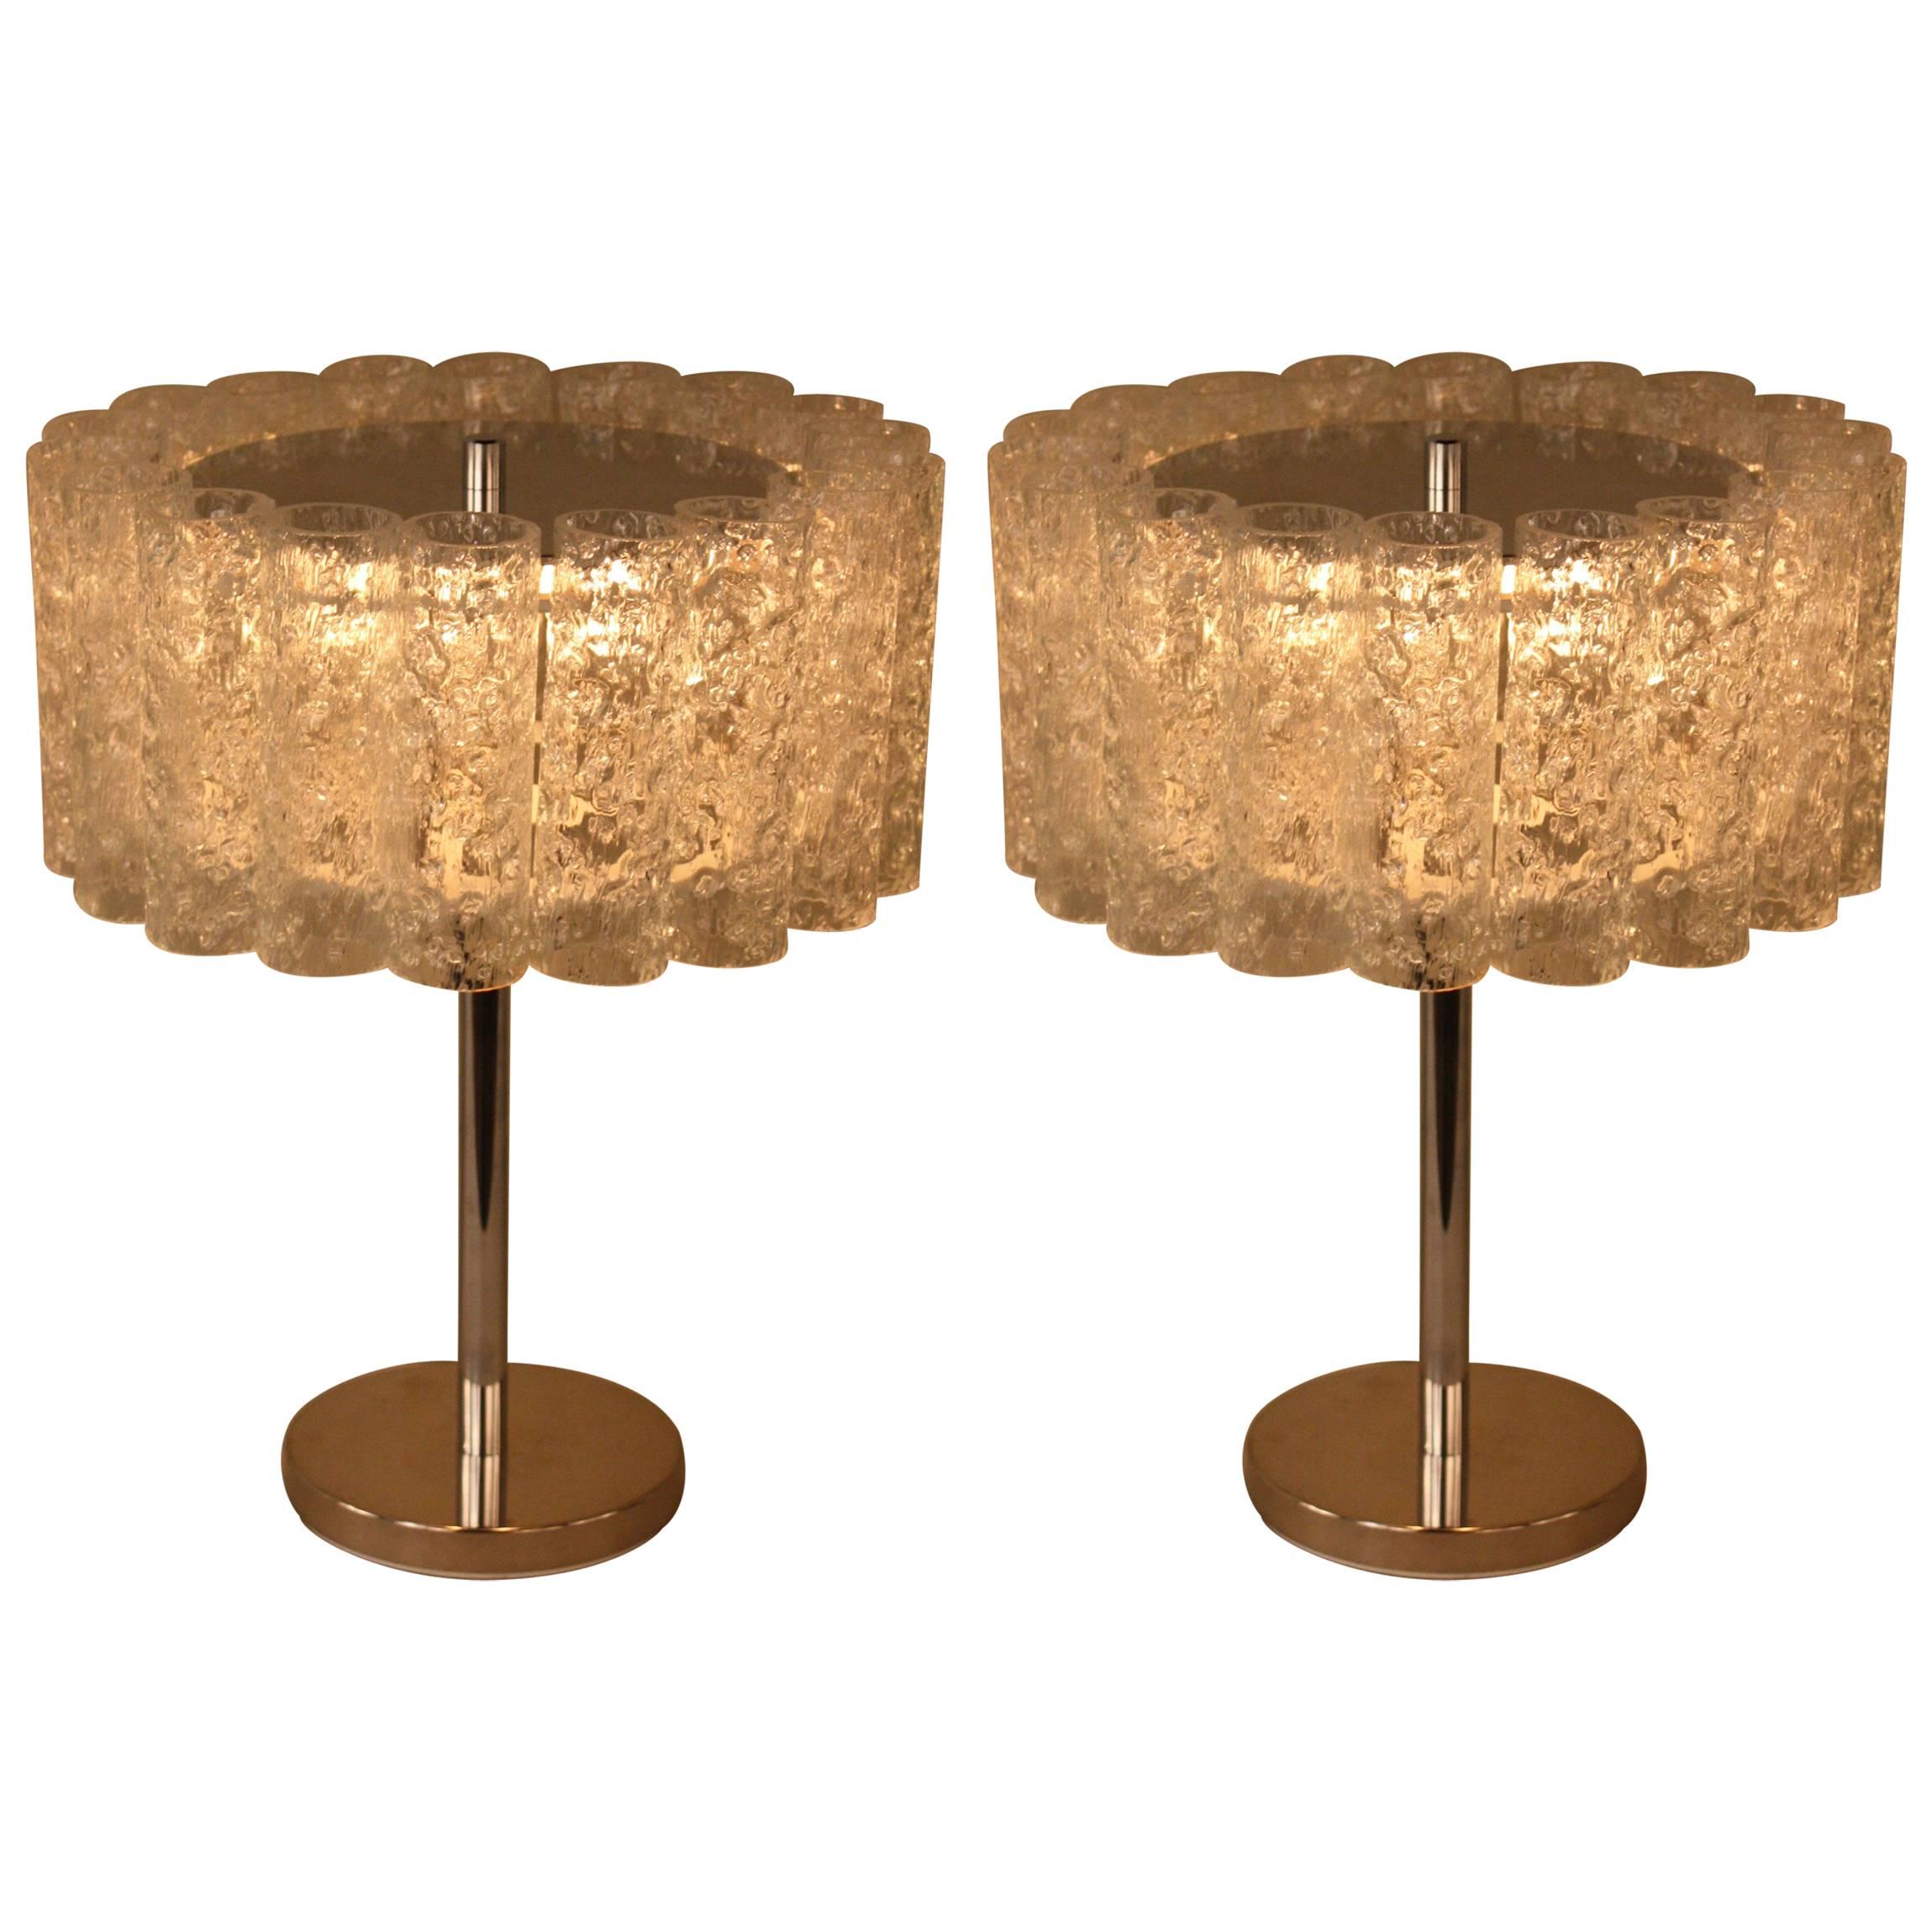 Pair of Texture Glass Table Lamps by Doria